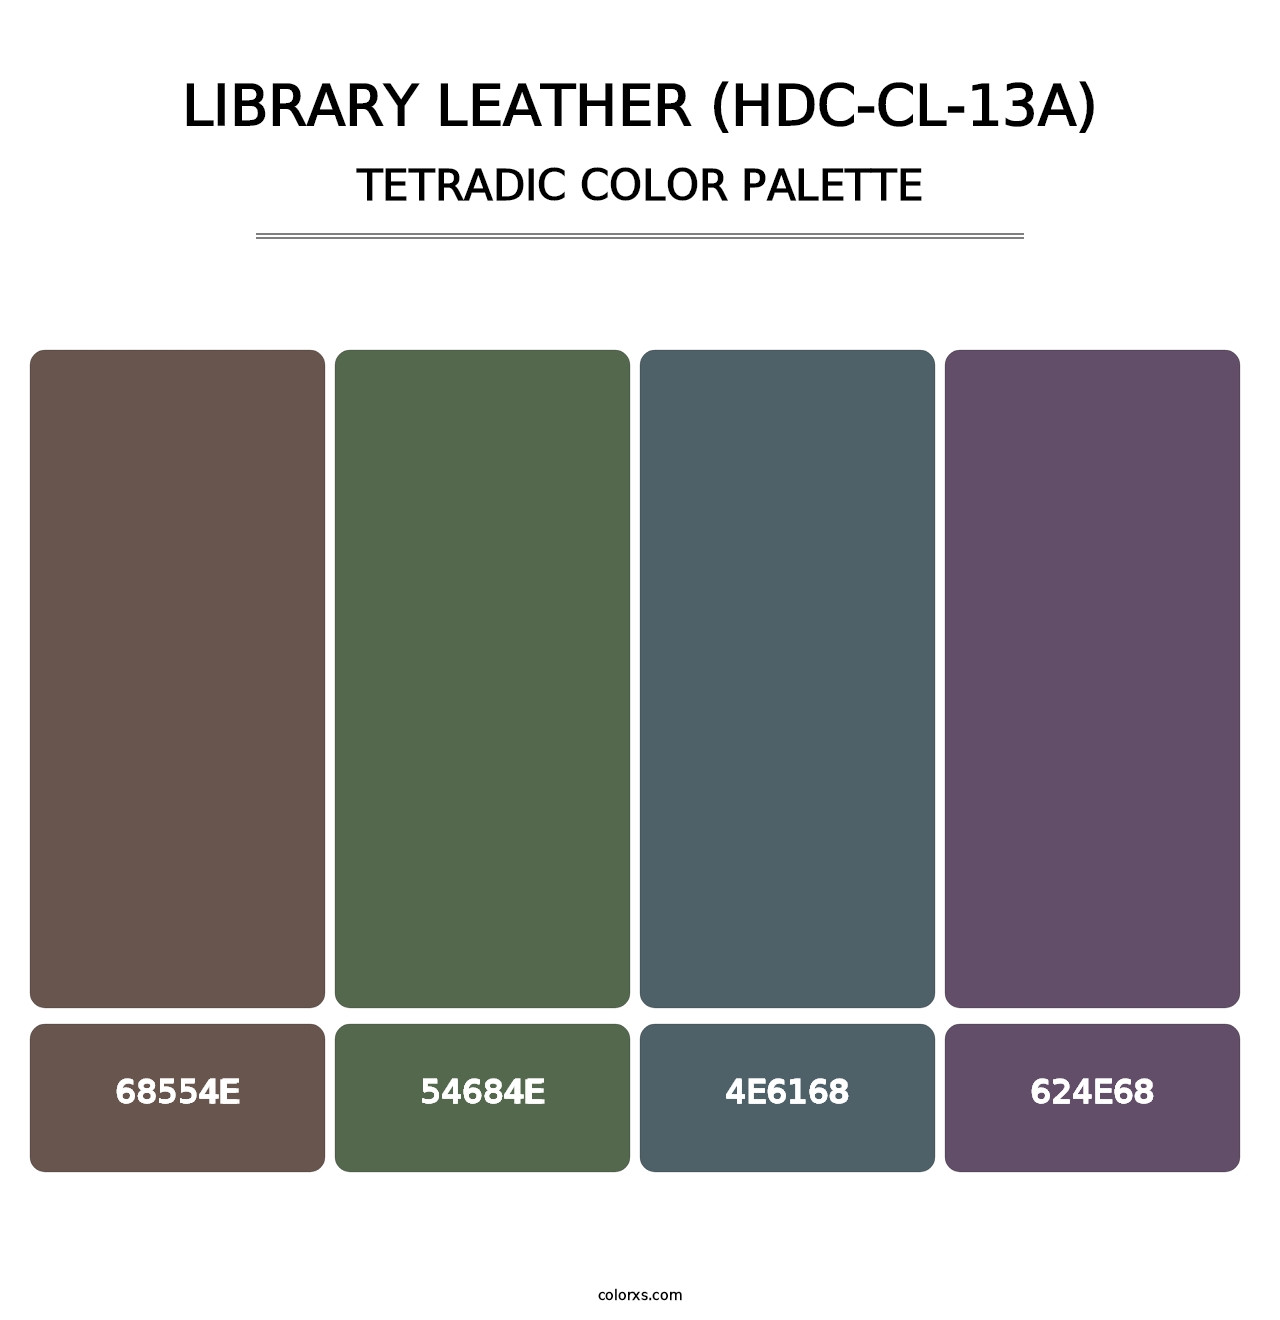 Library Leather (HDC-CL-13A) - Tetradic Color Palette